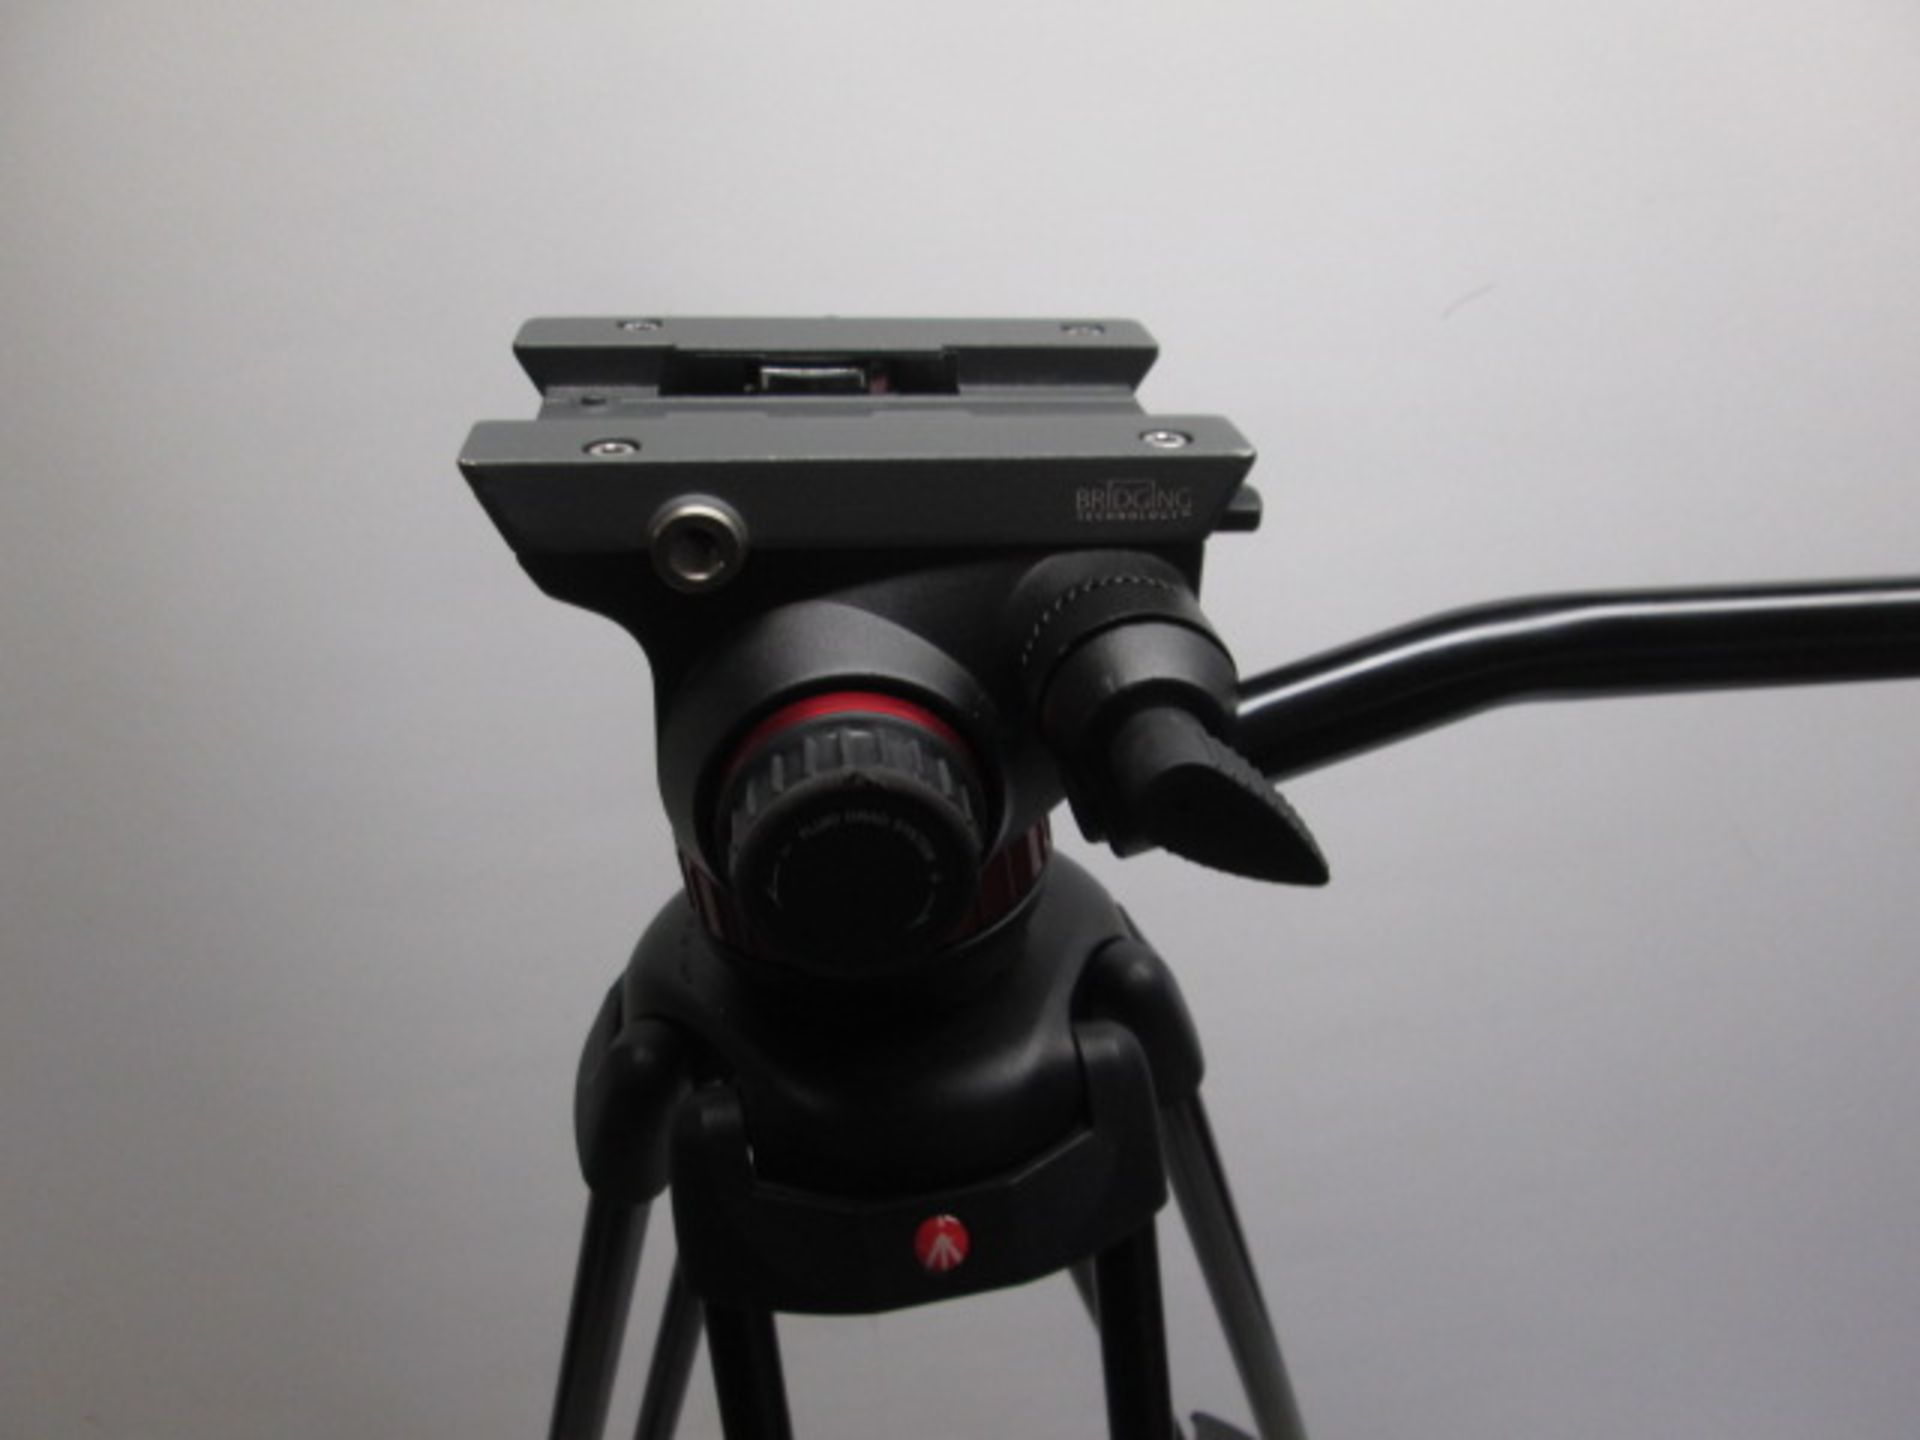 Manfrotto, Model 546B, Fully Adjustable, Professional Camera Tripod with Bridging Technology & Fluid - Image 3 of 5